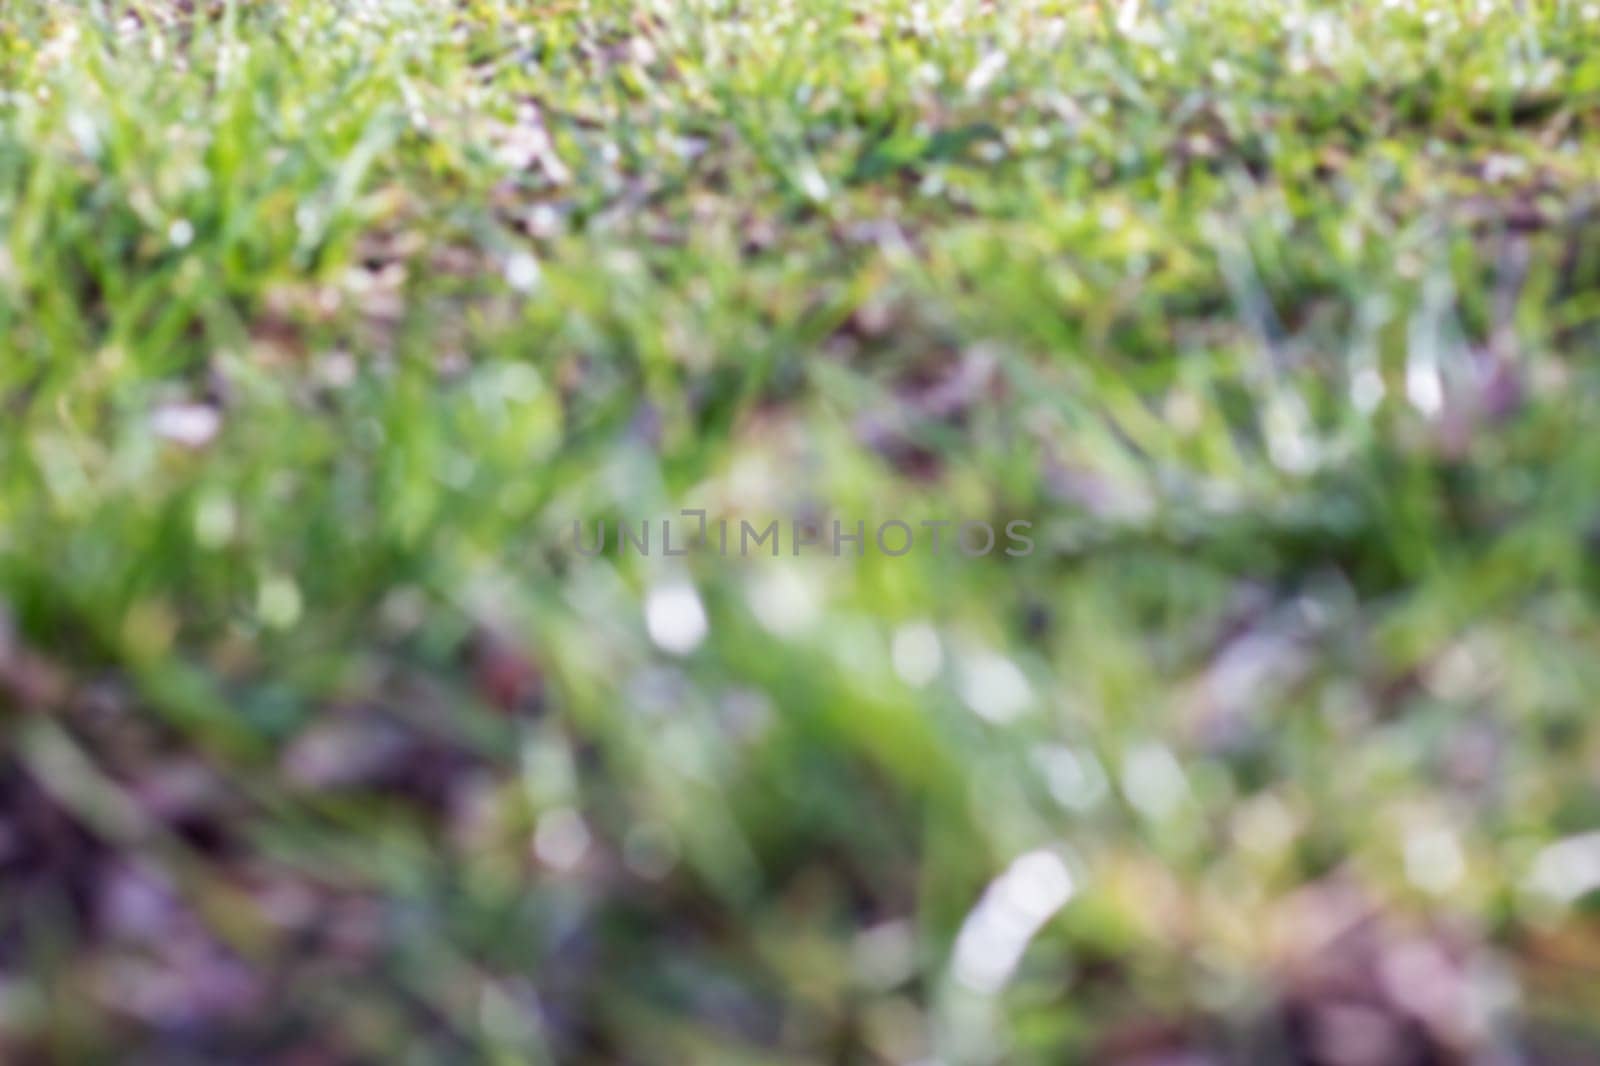 Blurred green small grass sprouts in early spring, background